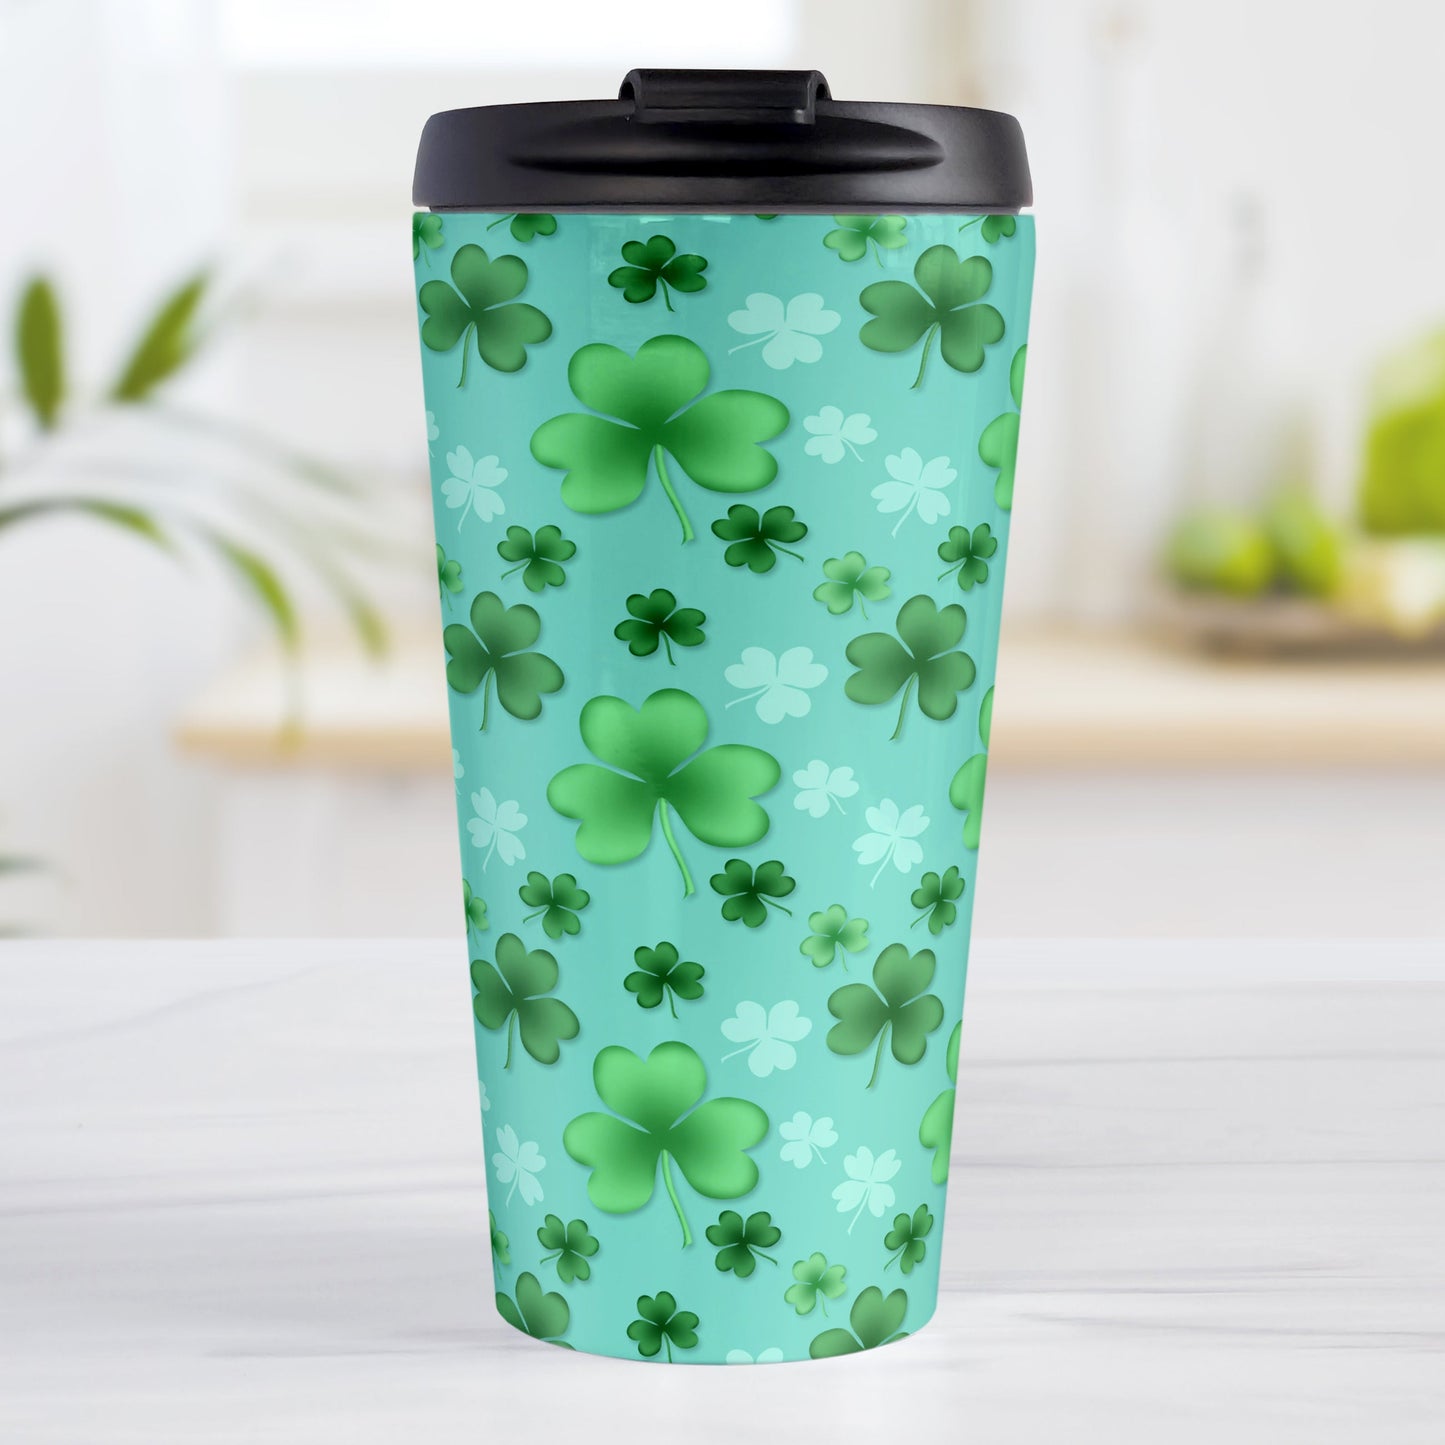 Lucky Clover Pattern Teal and Green Travel Mug (15oz, stainless steel insulated) at Amy's Coffee Mugs. A travel mug designed with a lucky green clover pattern with a 4-leaf clover among 3-leaf clovers, in different shades of green, over a teal background that wraps around the mug.